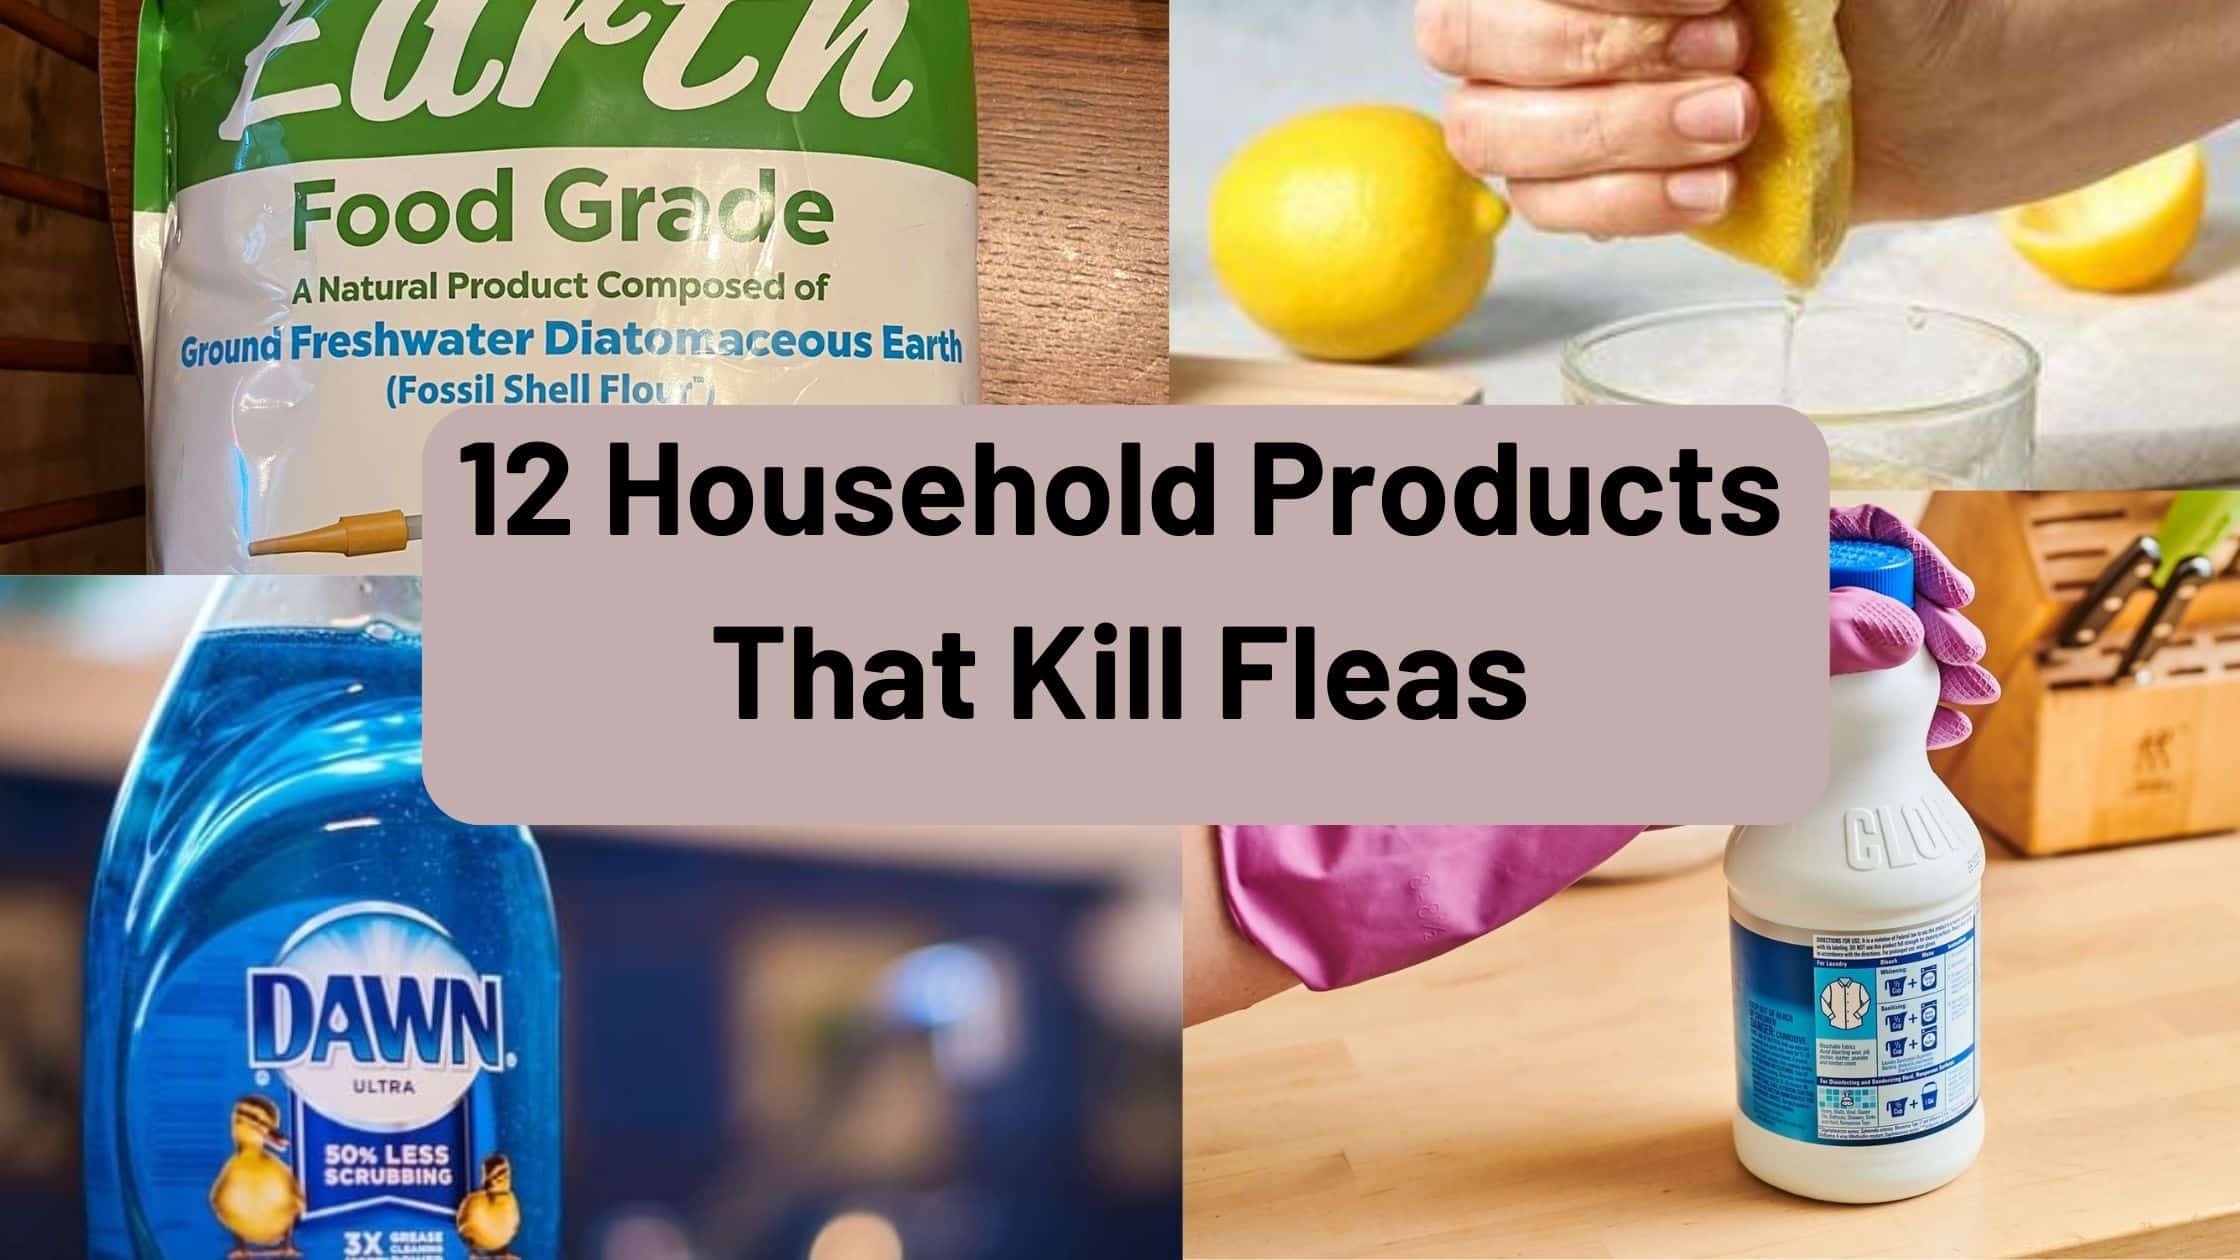  Household Products That Kill Fleas